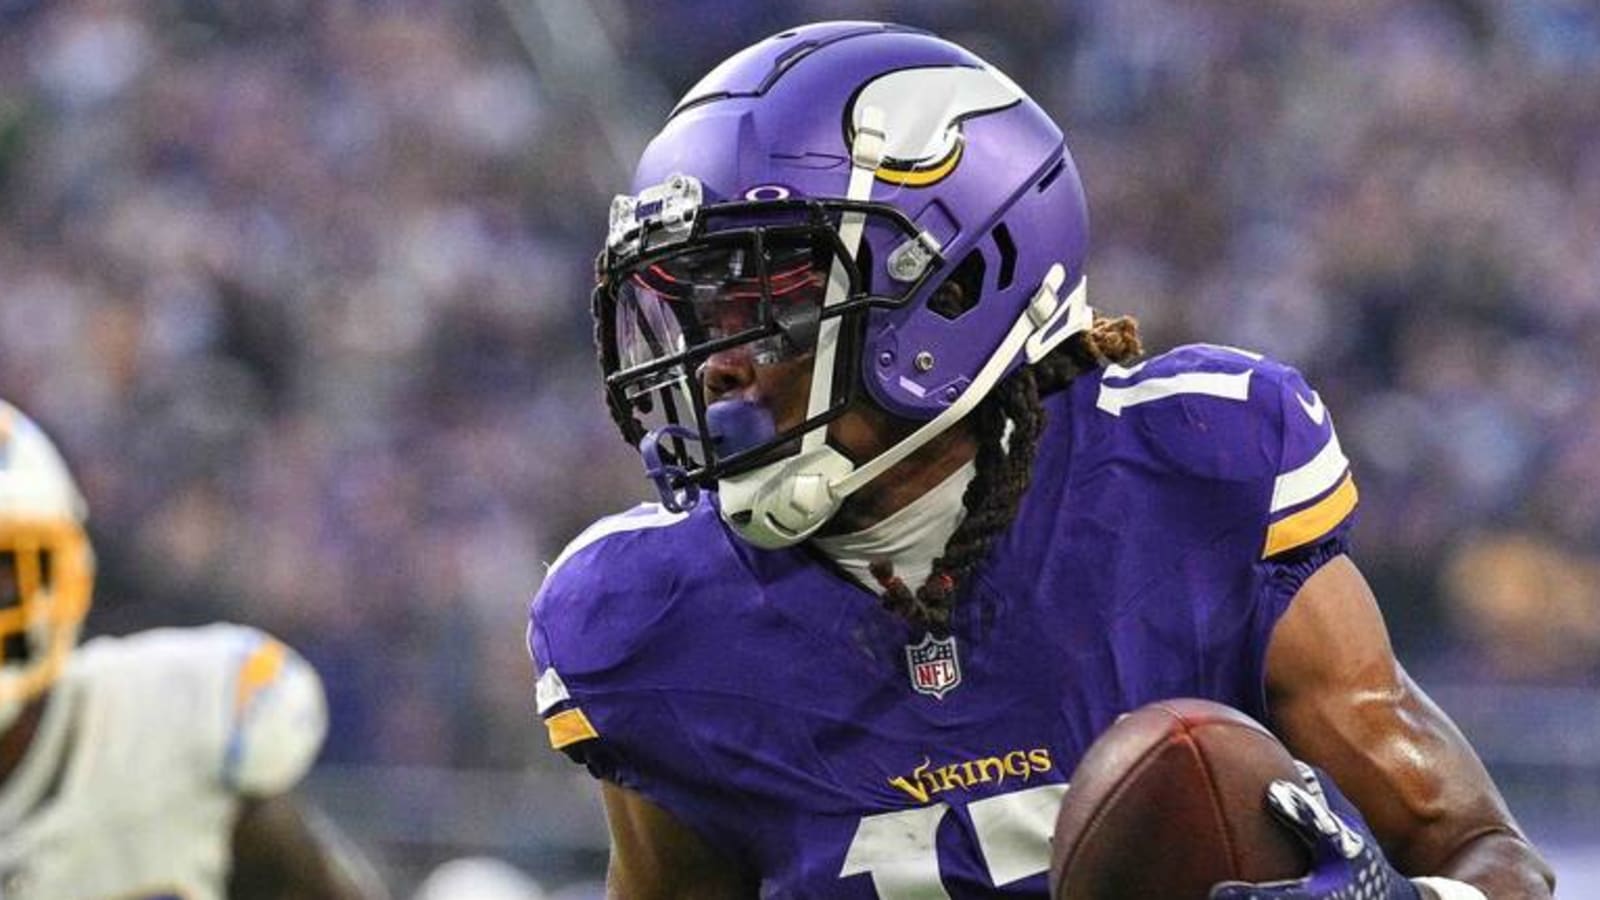 Week 6 fantasy football waiver wire must-adds